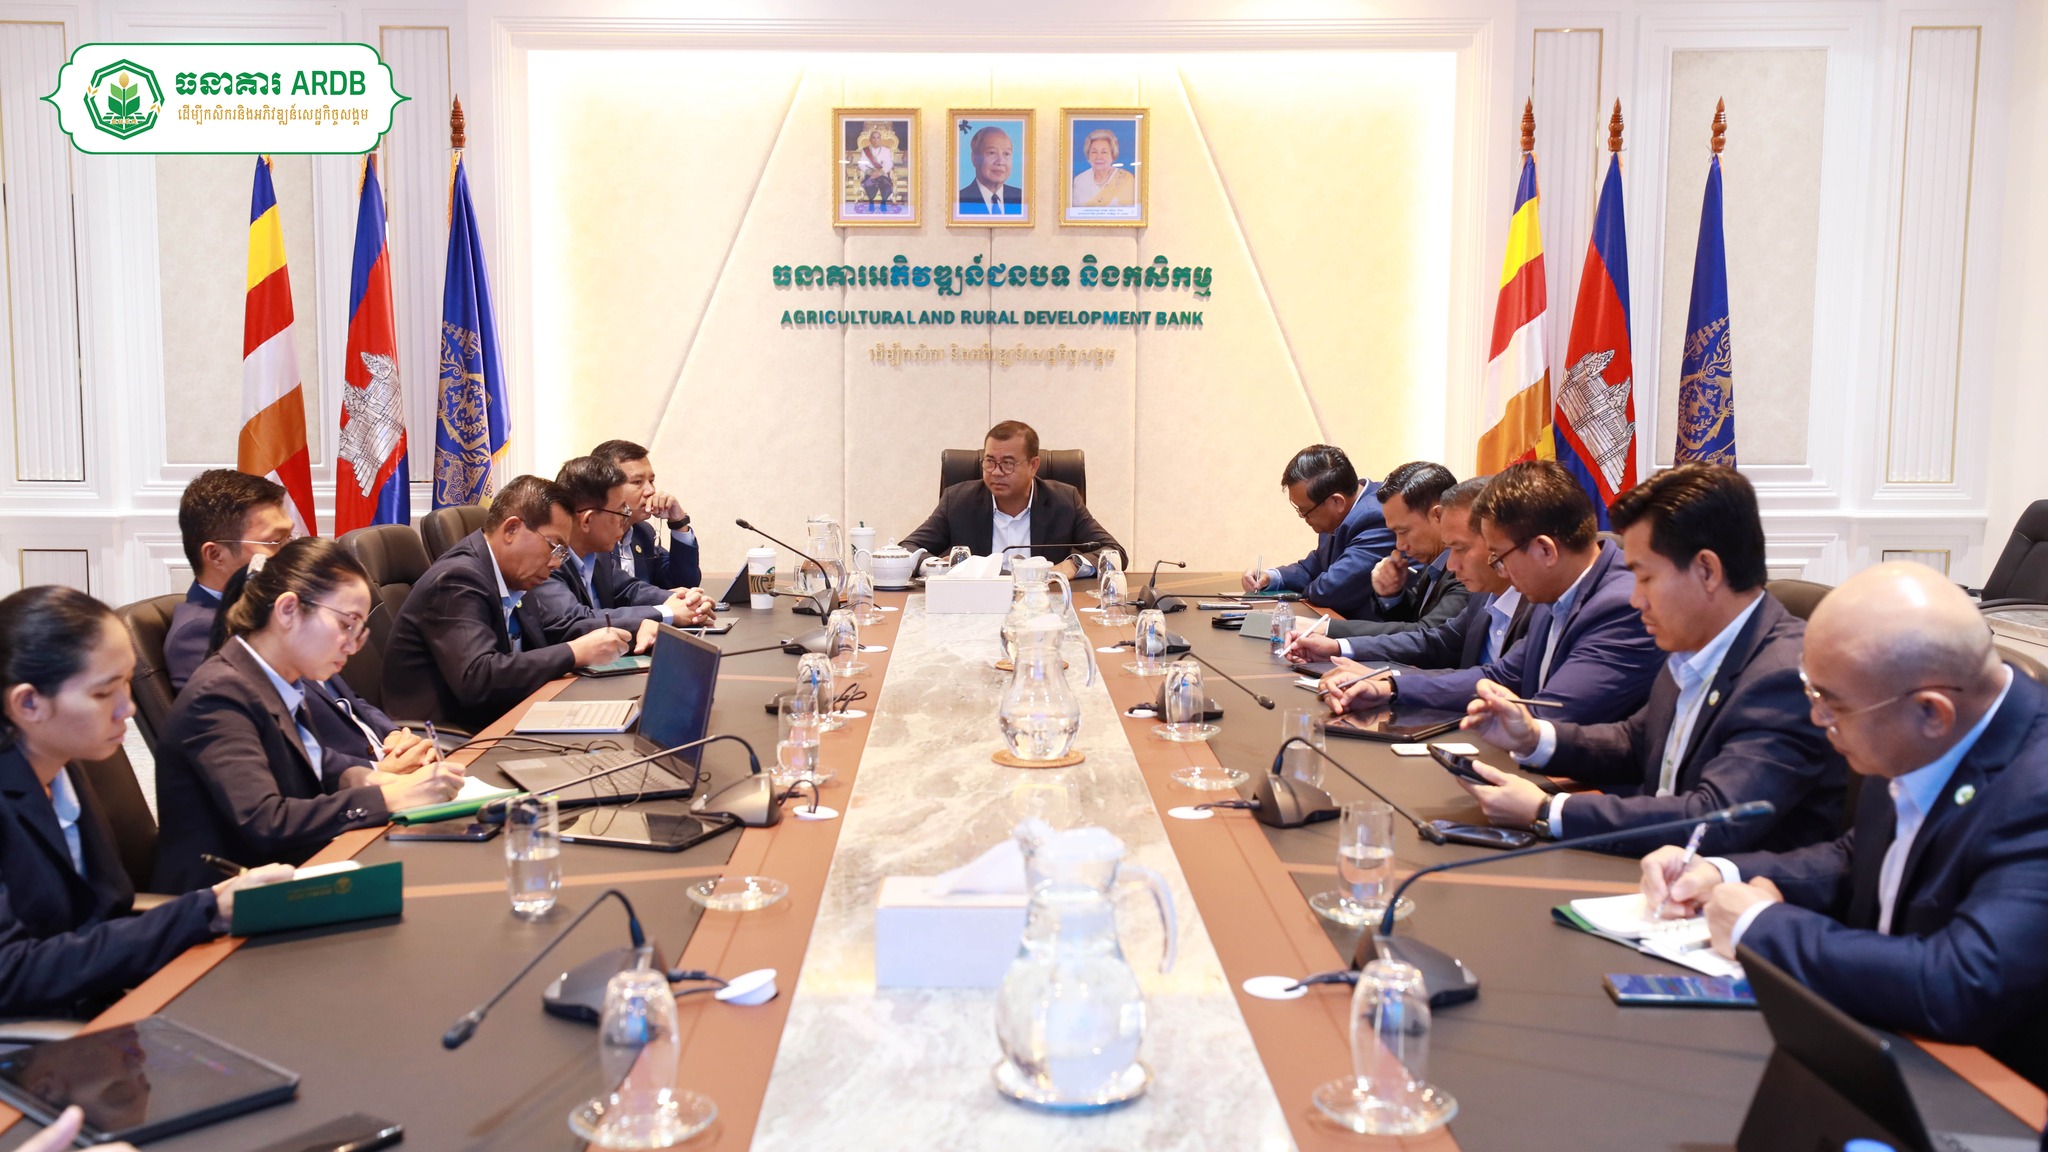 The Agricultural and Rural Development Bank’s (ARDB) organized its weekly Management Meeting to review and discuss its weekly work progress and the plan forward, and other agendas.